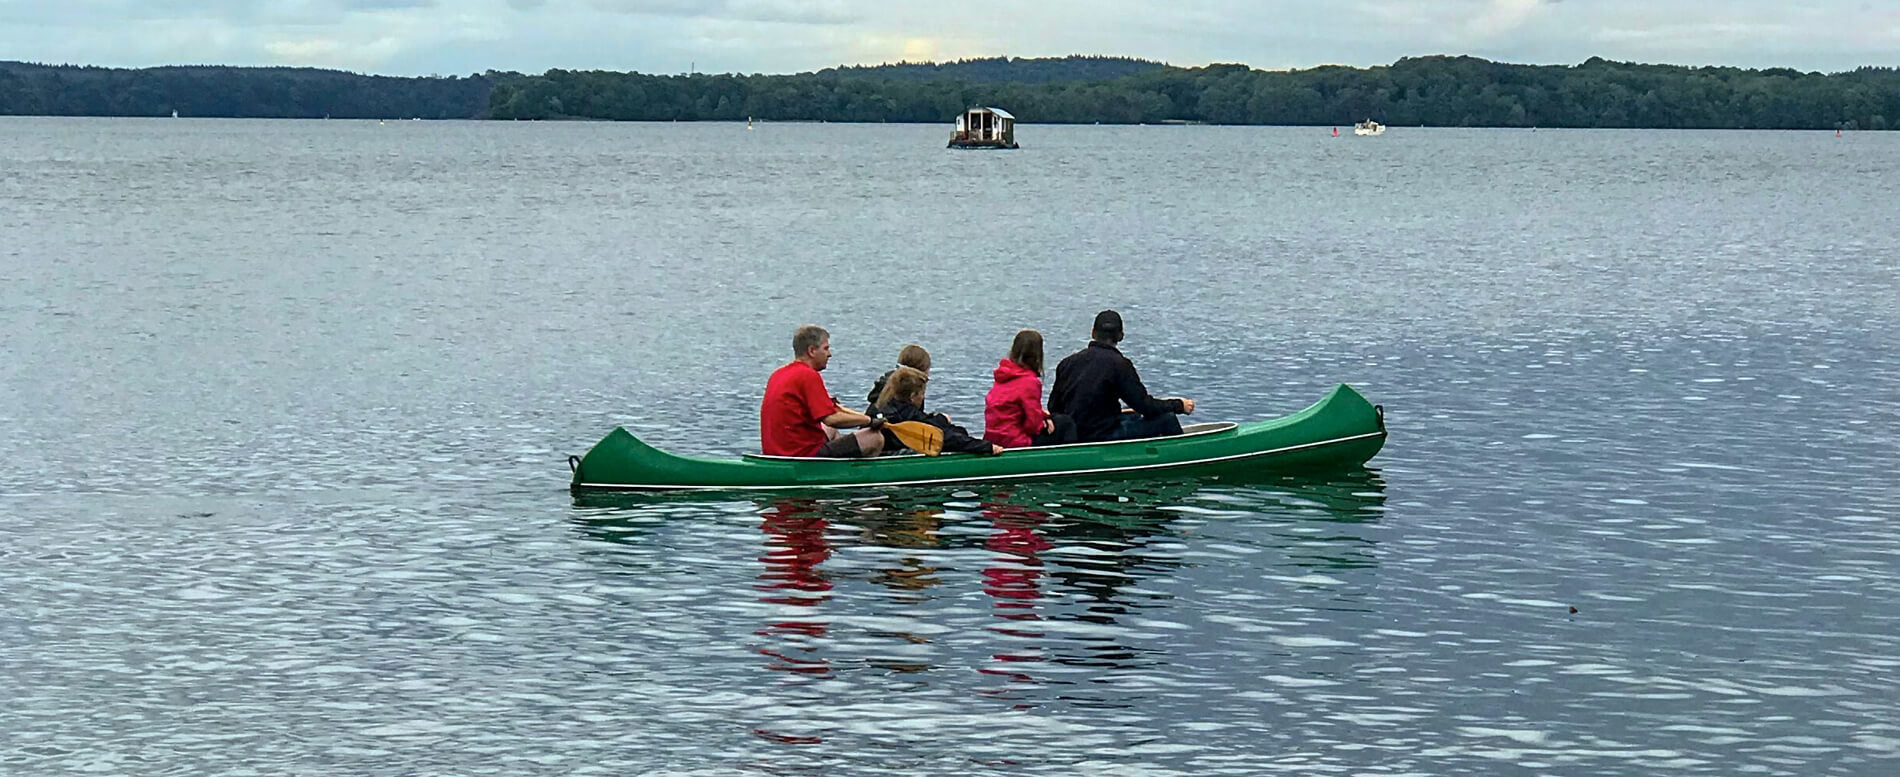 Group of people on a green canoe